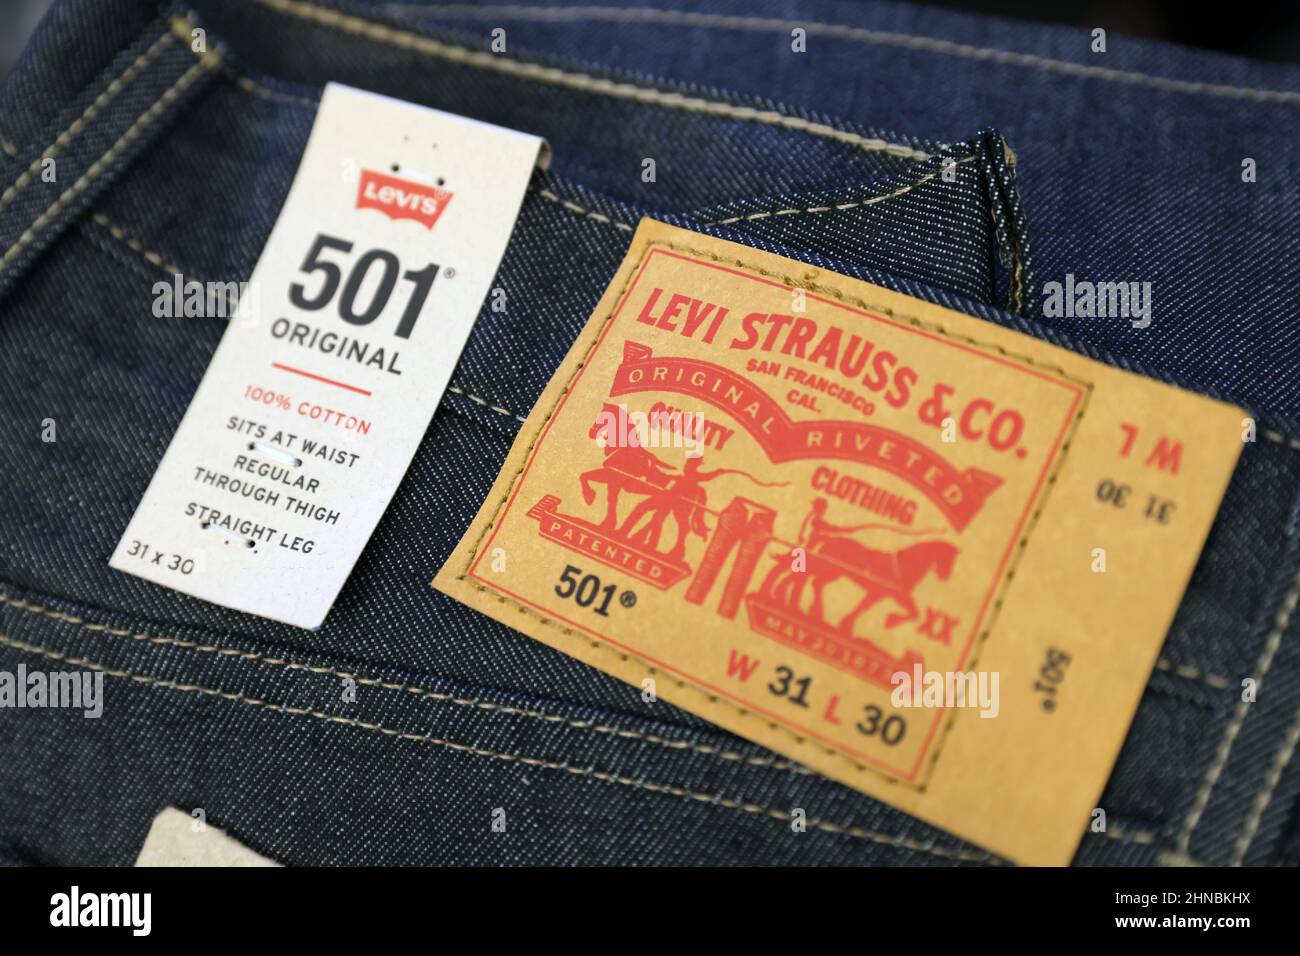 The Levi Strauss & Co. label is seen on jeans in a store at the Woodbury